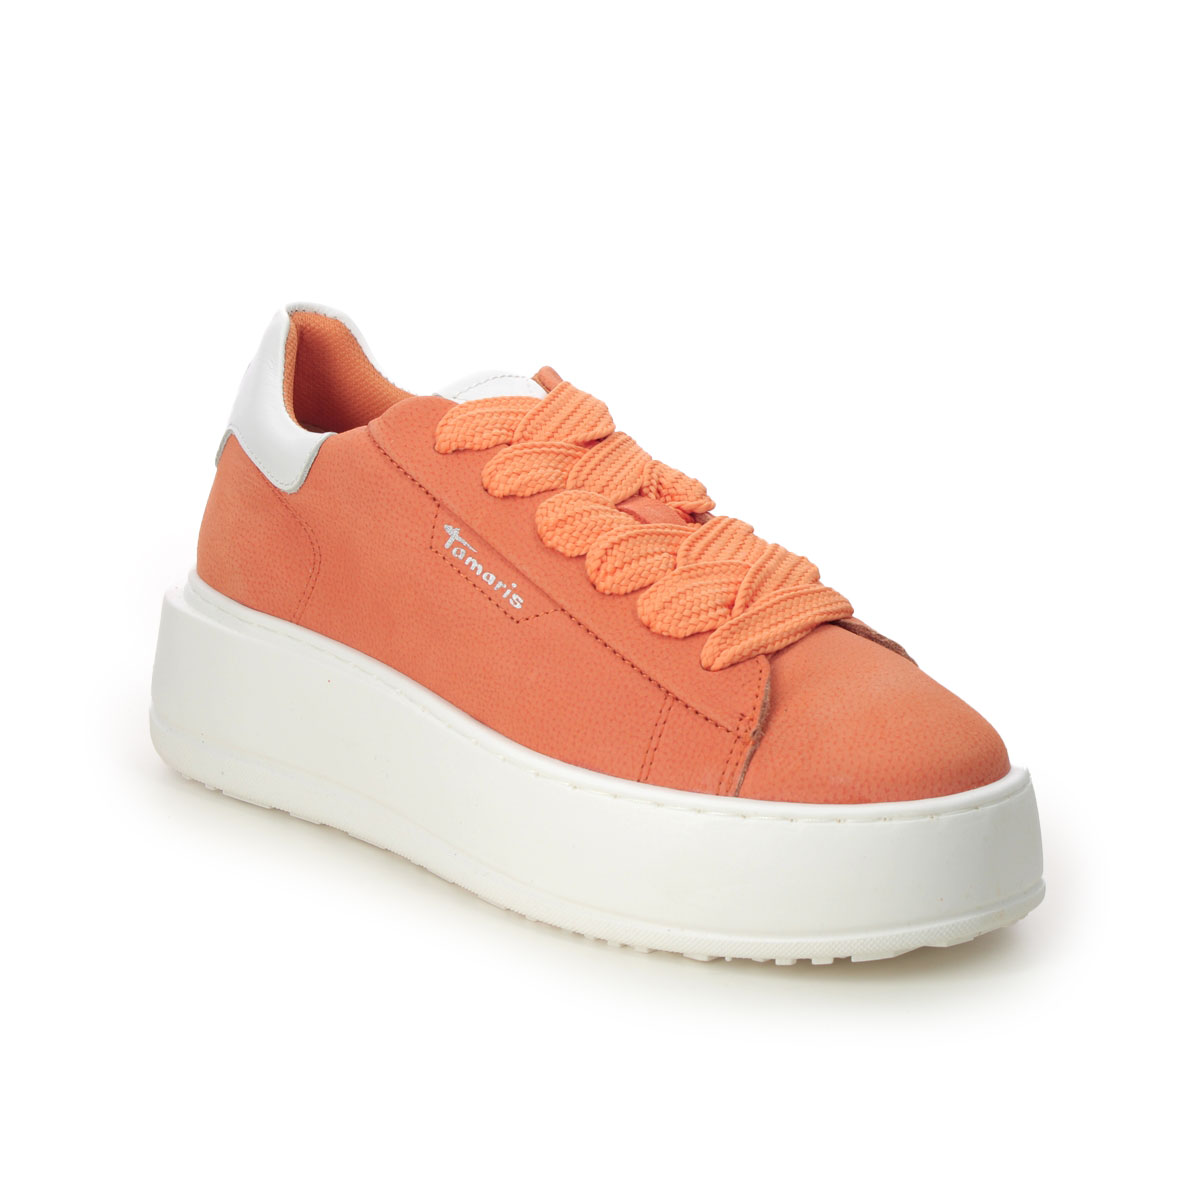 Tamaris Platform 50 Orange Womens trainers 23812-41-606 in a Plain Leather in Size 40